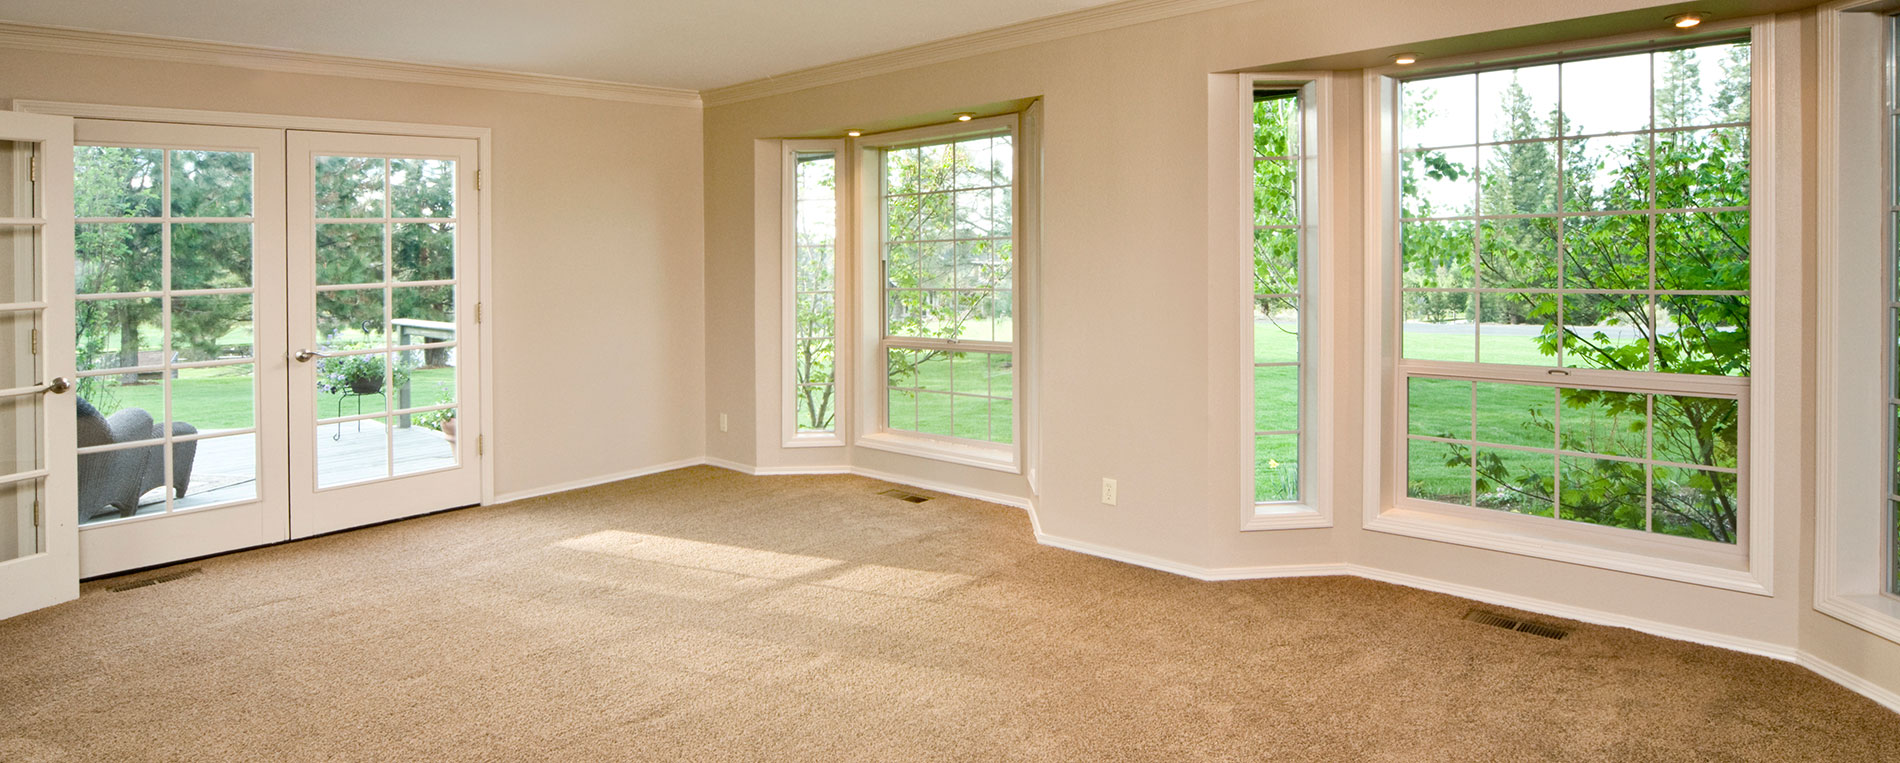 Affordable Carpet Cleaning Services Encino